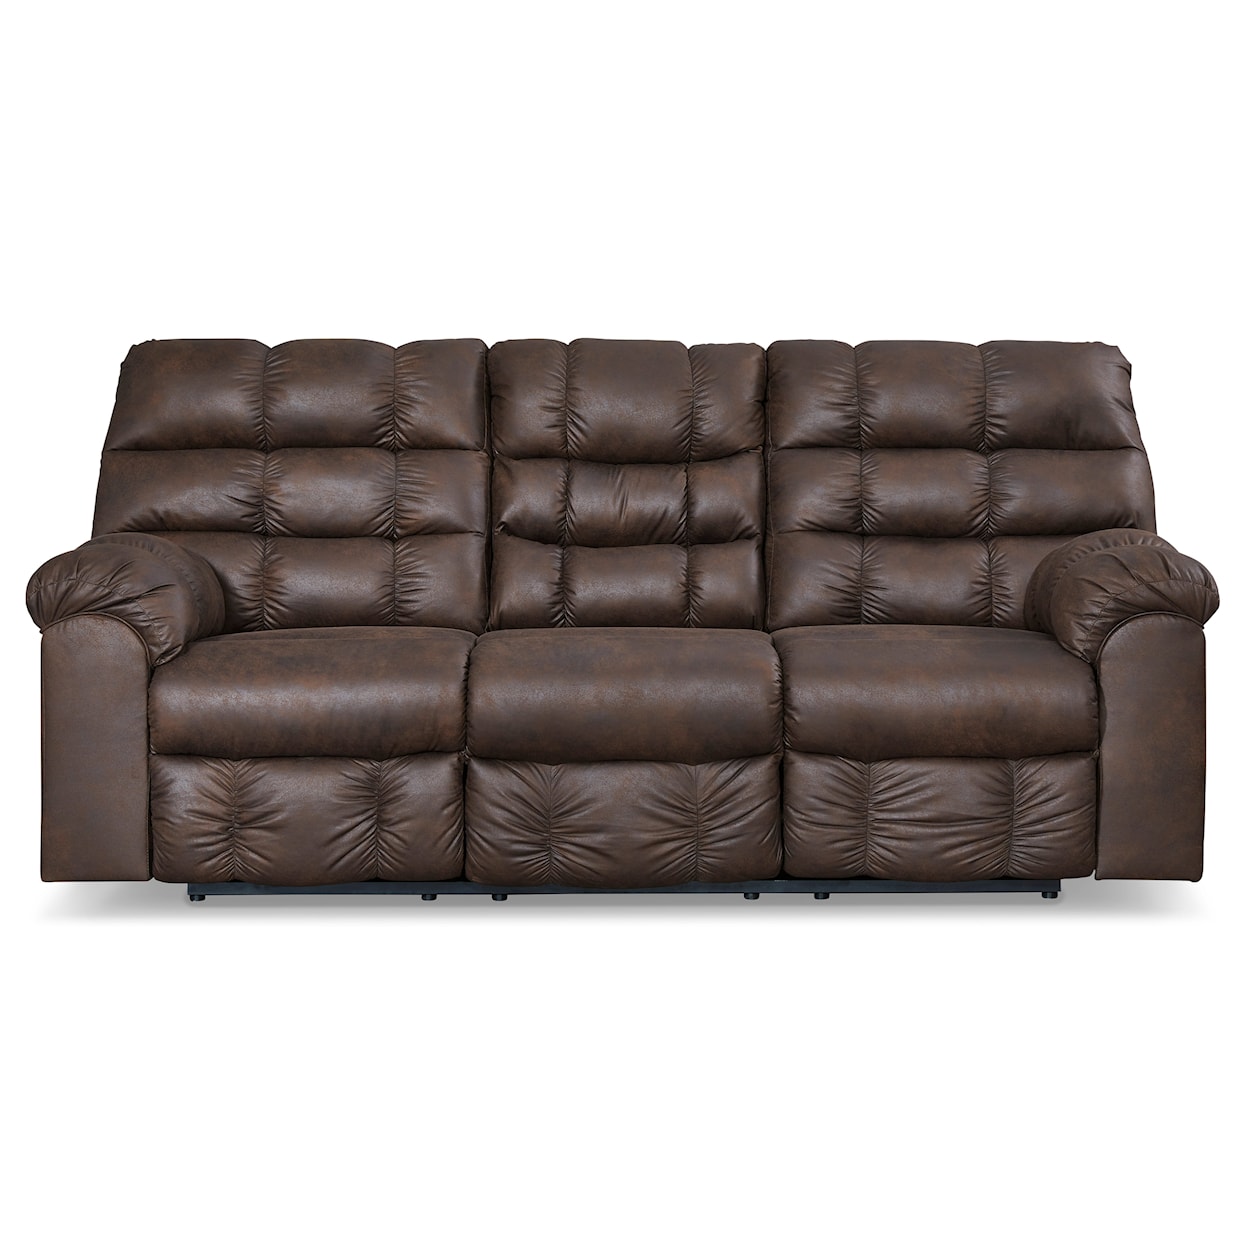 Signature Design by Ashley Derwin Reclining Sofa with Drop Down Table